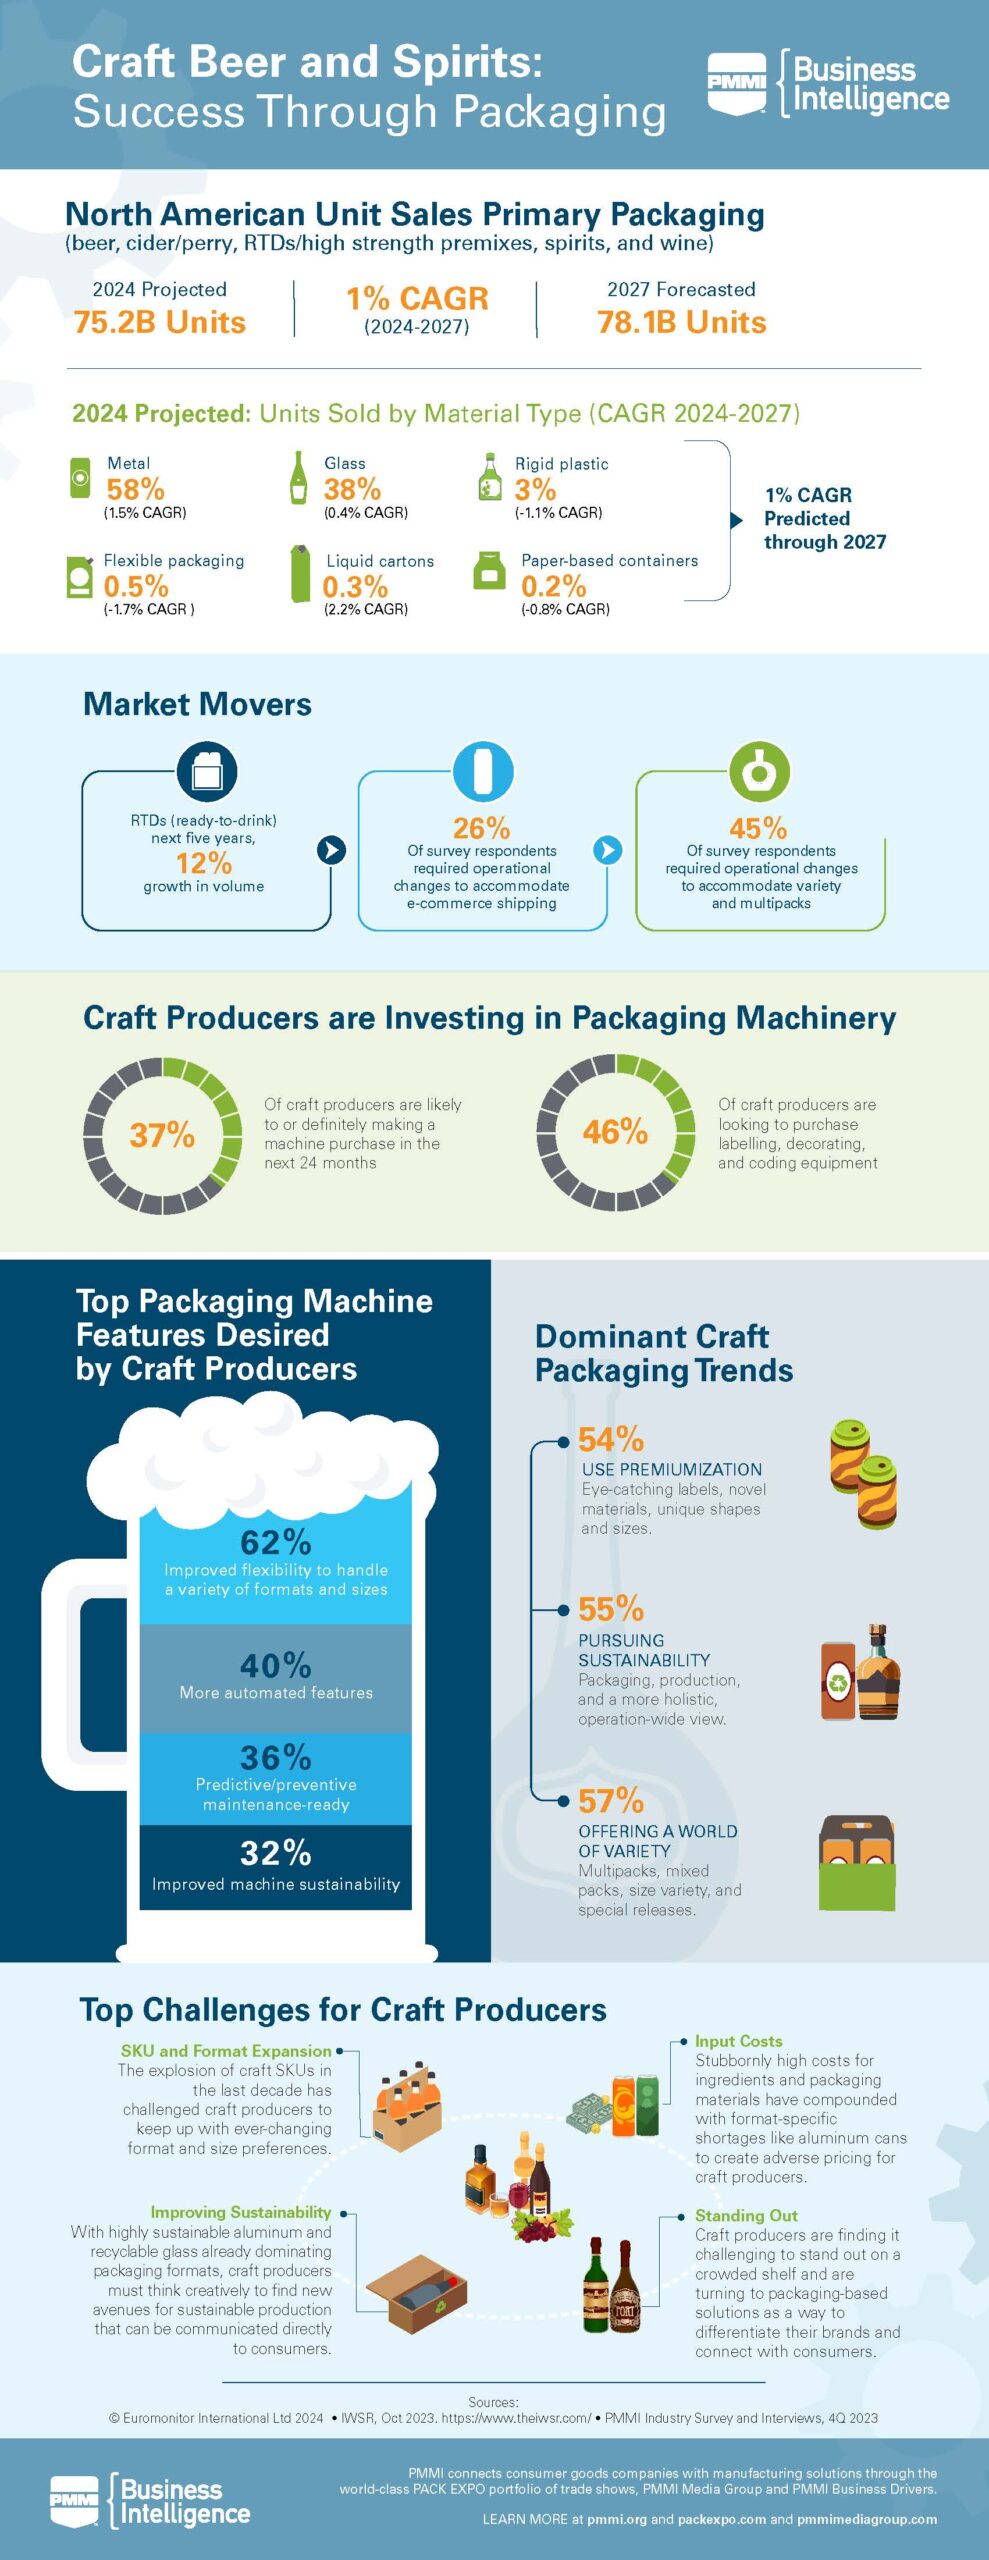 PMMI Craft Beer and Spirits Infographic